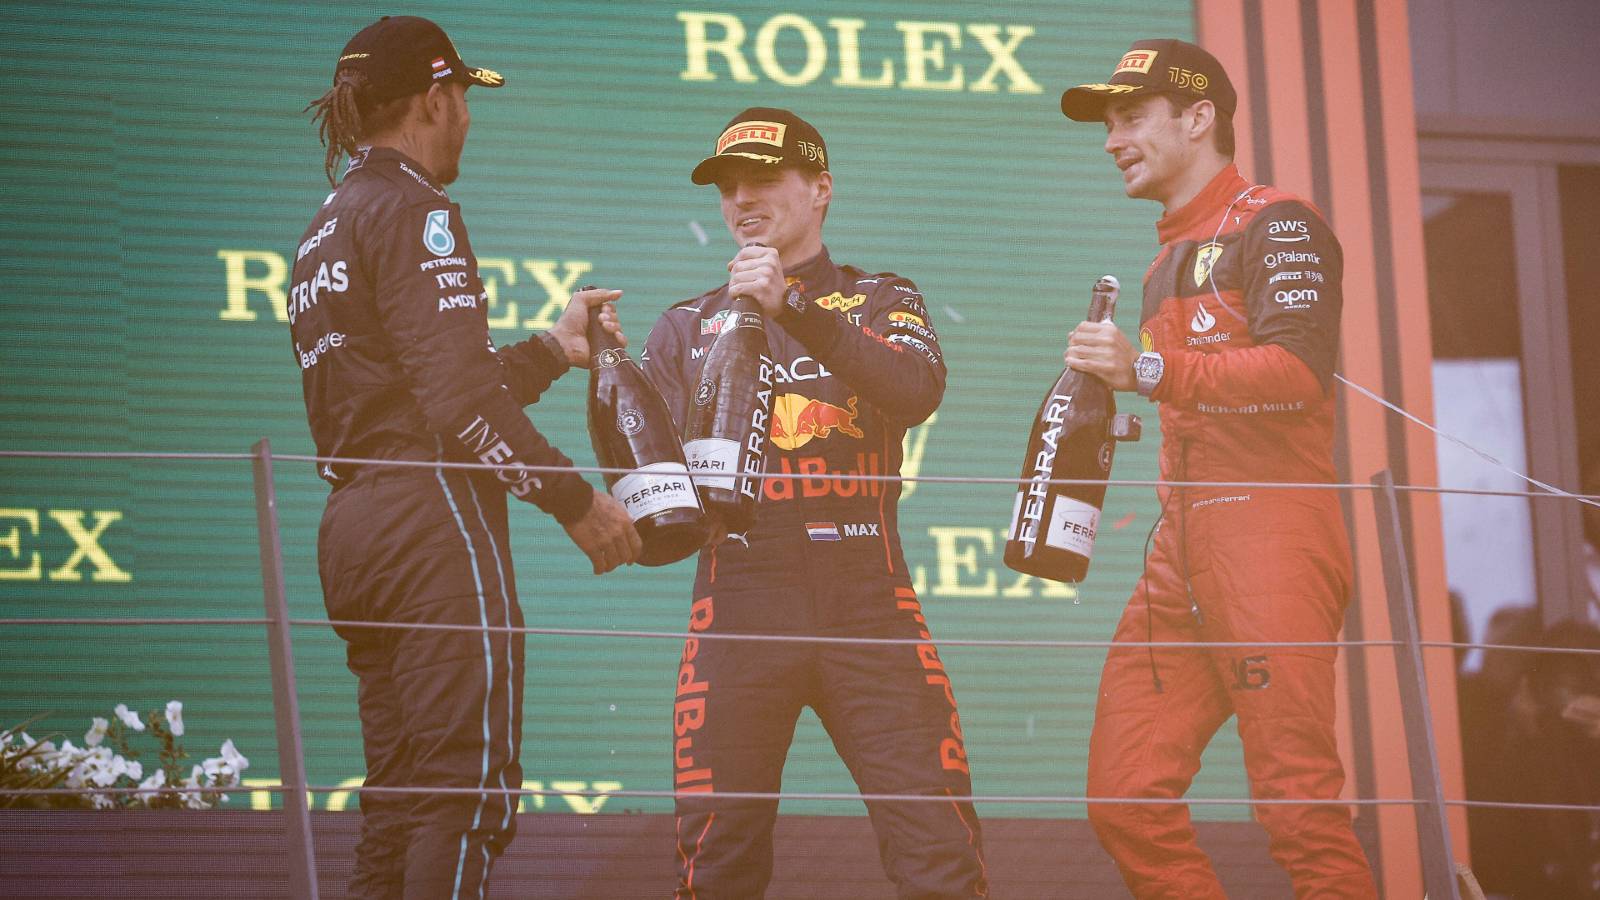 Lewis Hamilton and Max Verstappen on the Austrian GP podium. Red Bull Ring July 2022.